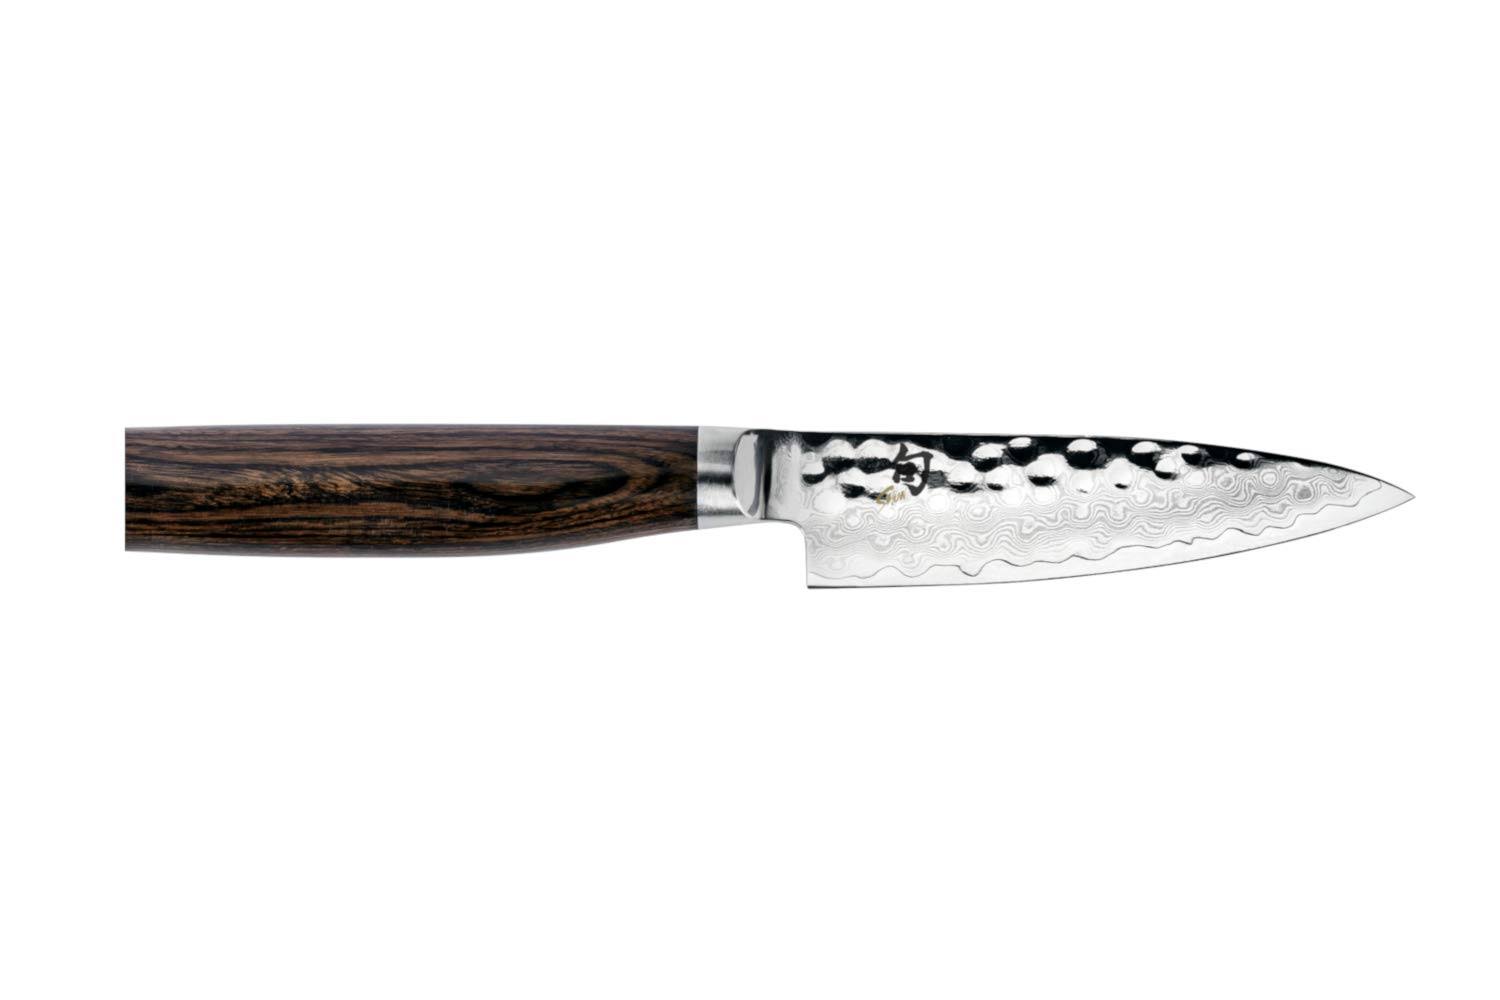 Shun Premier Limited Edition Paring Knife - 4"